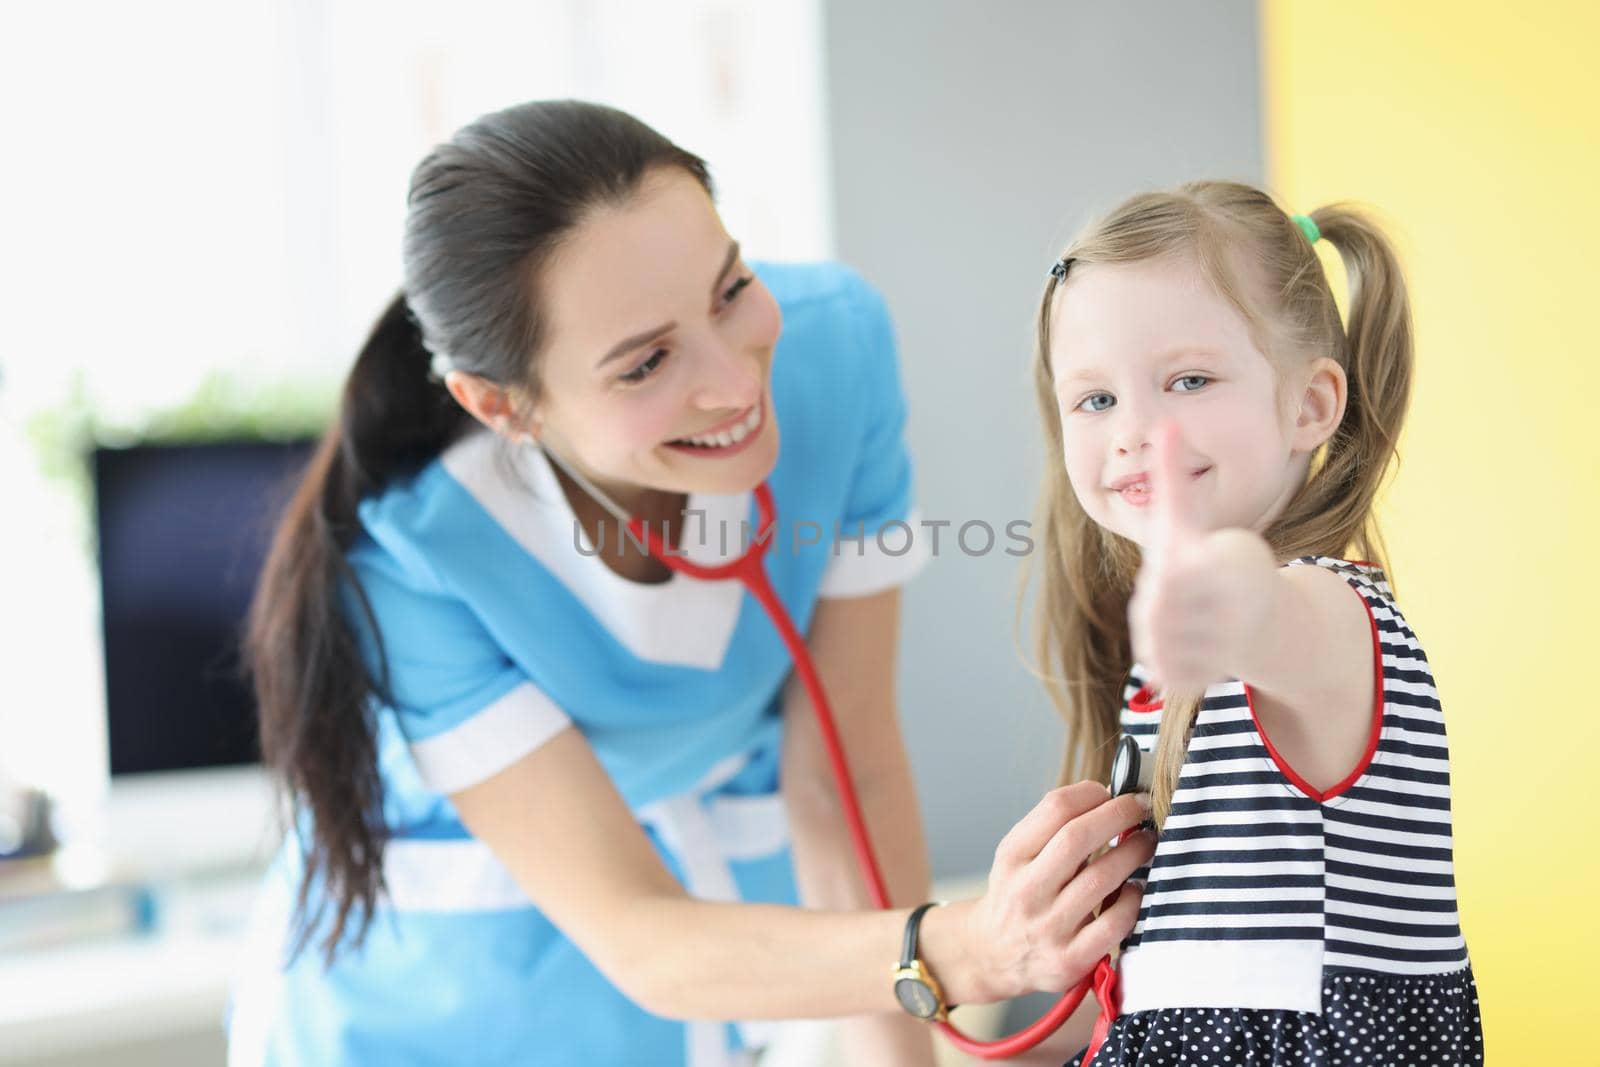 Girl being examined by pediatrician doctor, happy child show thumbs up gesture by kuprevich